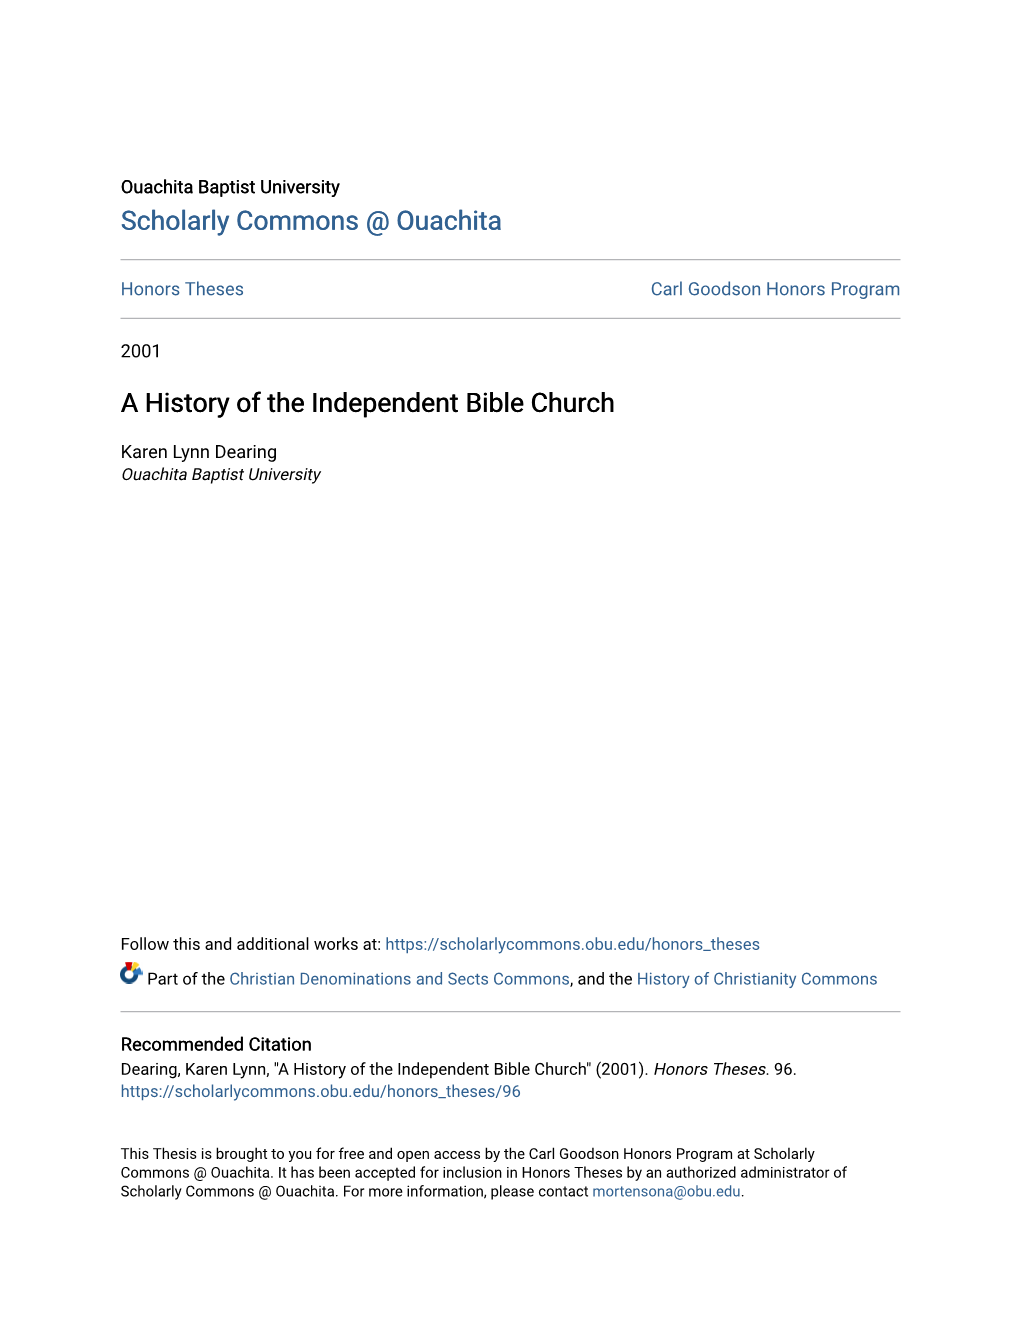 A History of the Independent Bible Church